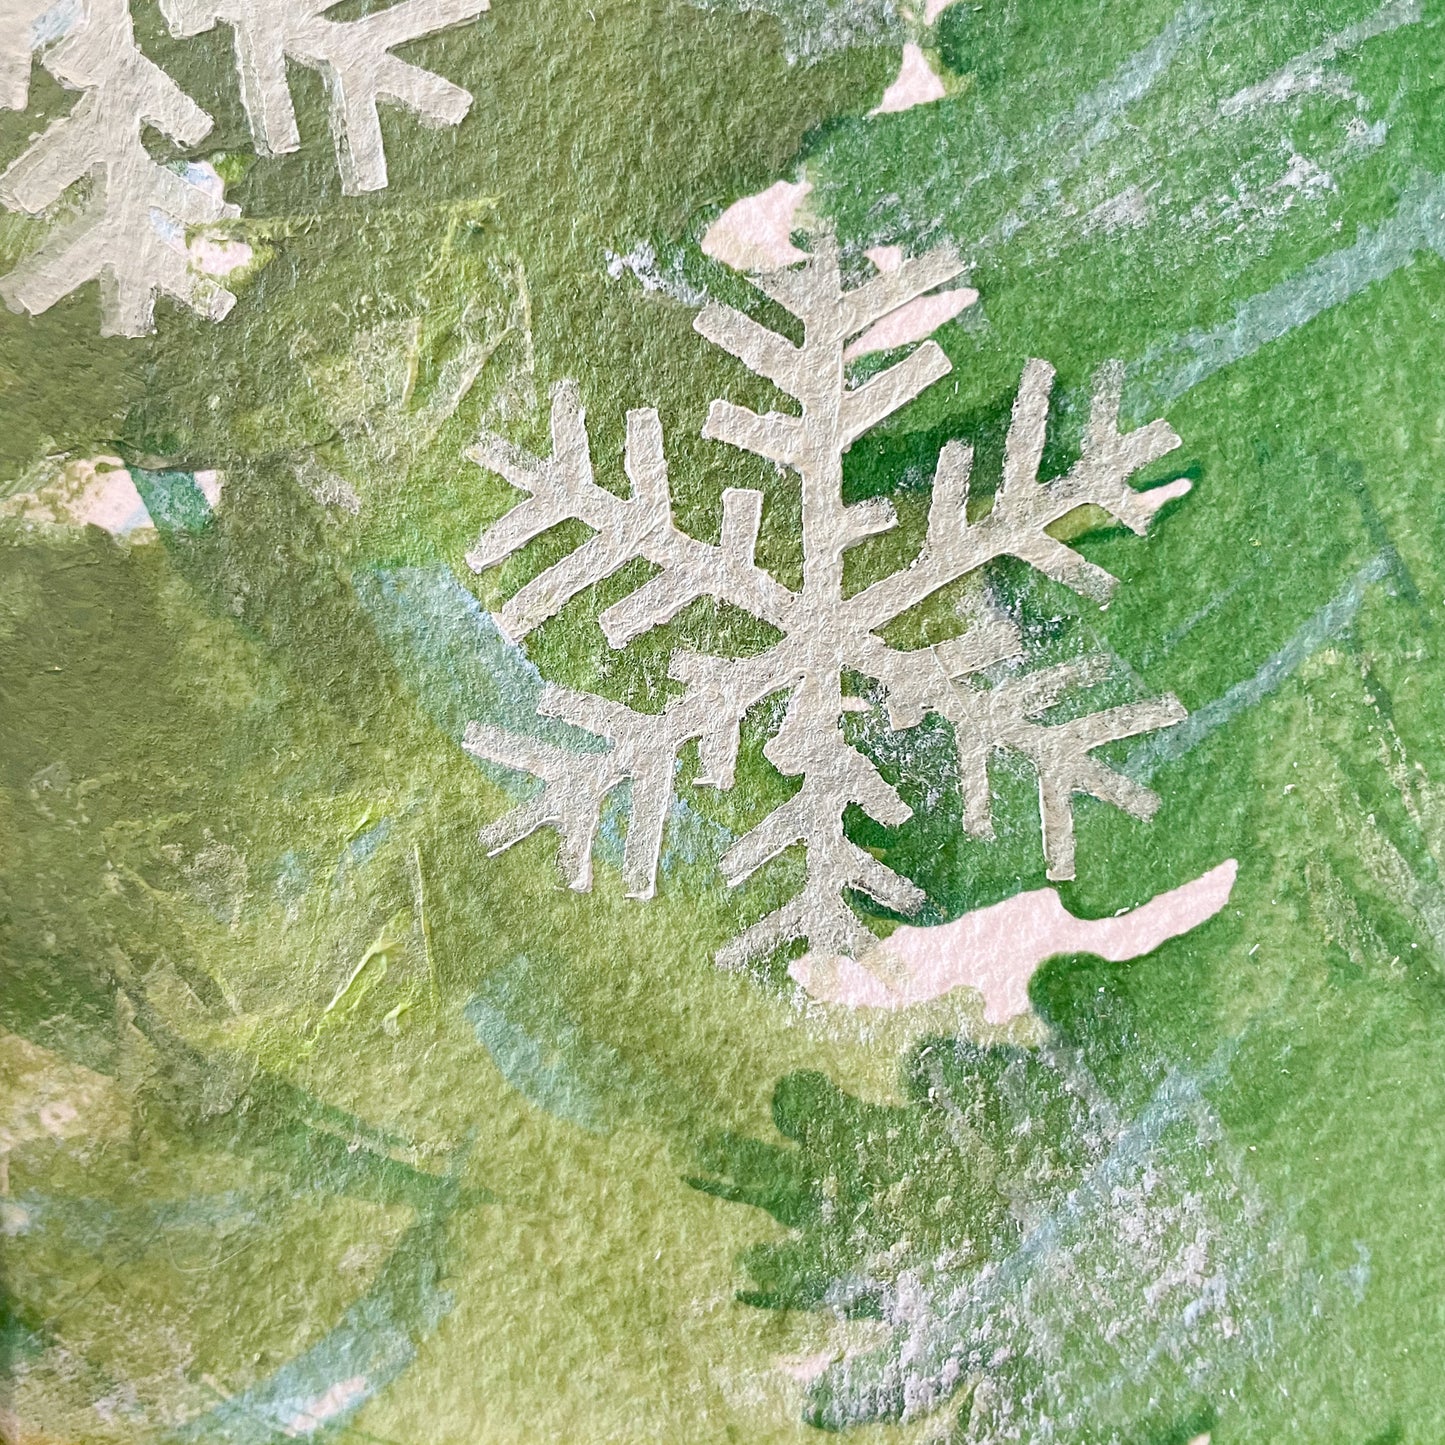 Evergreens and snowflakes